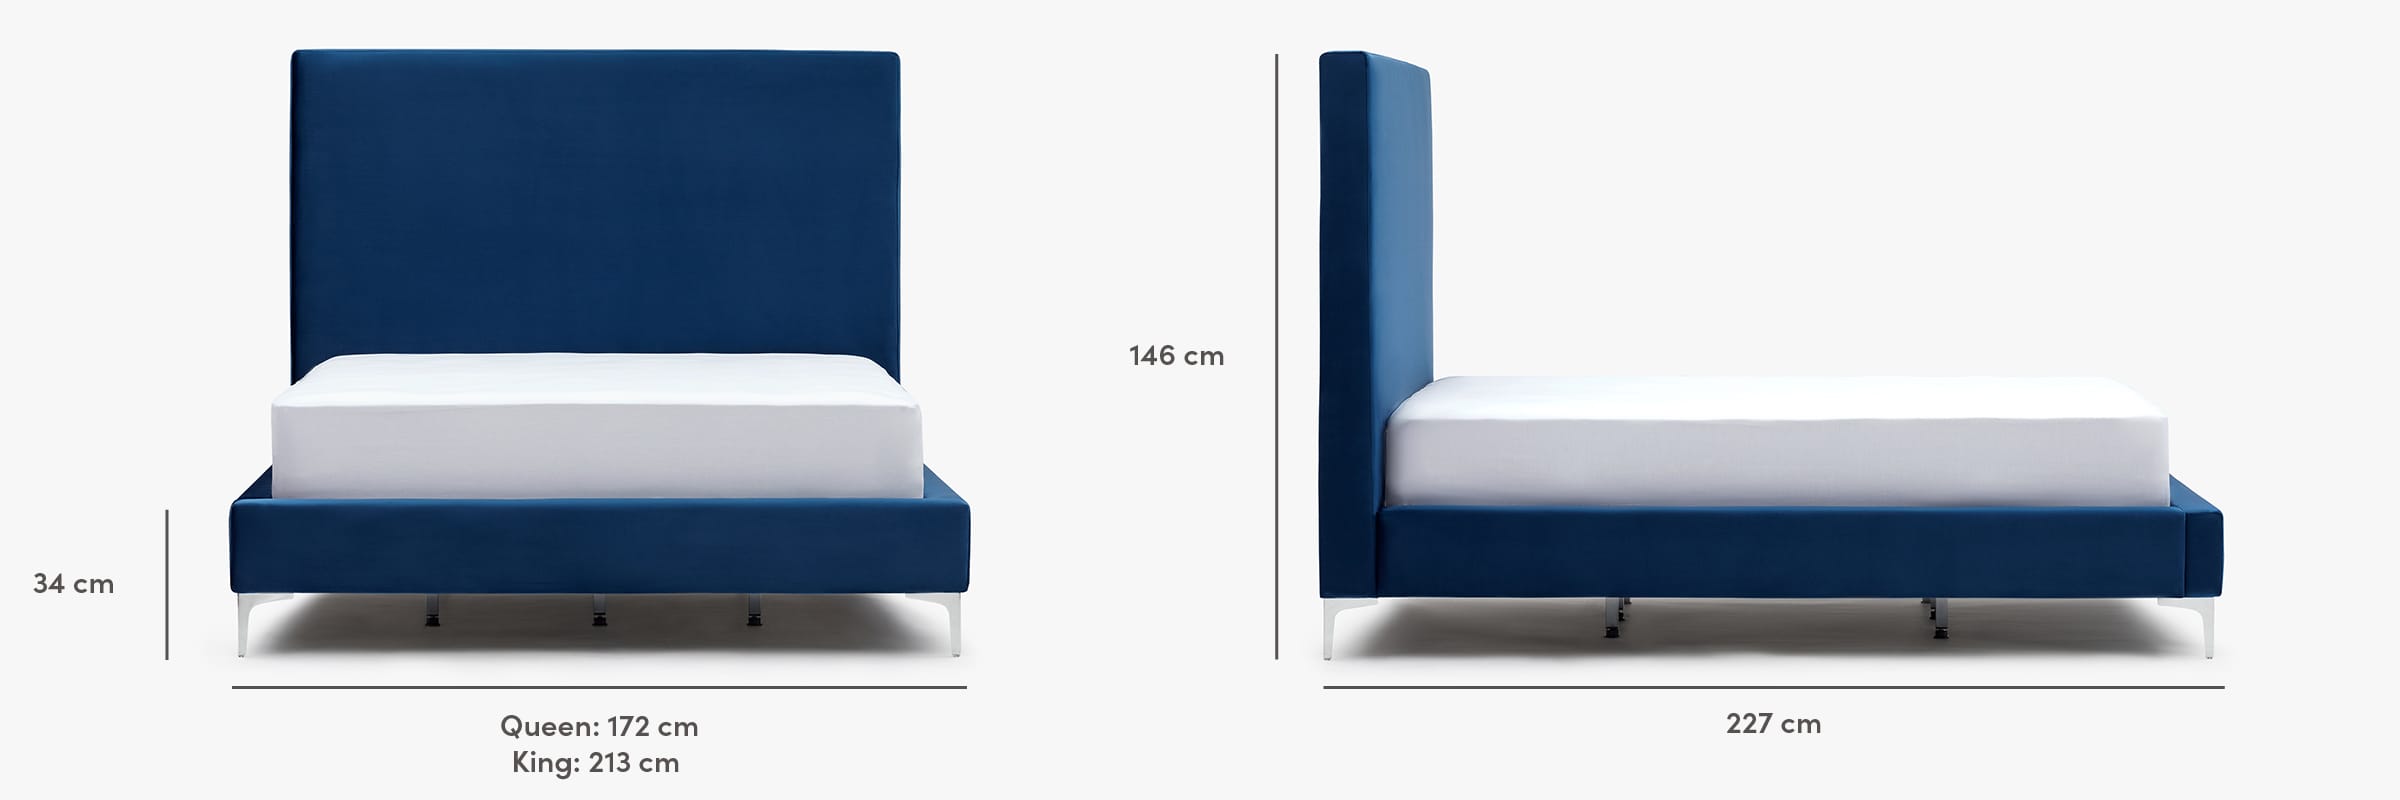 Modena bed dimensions